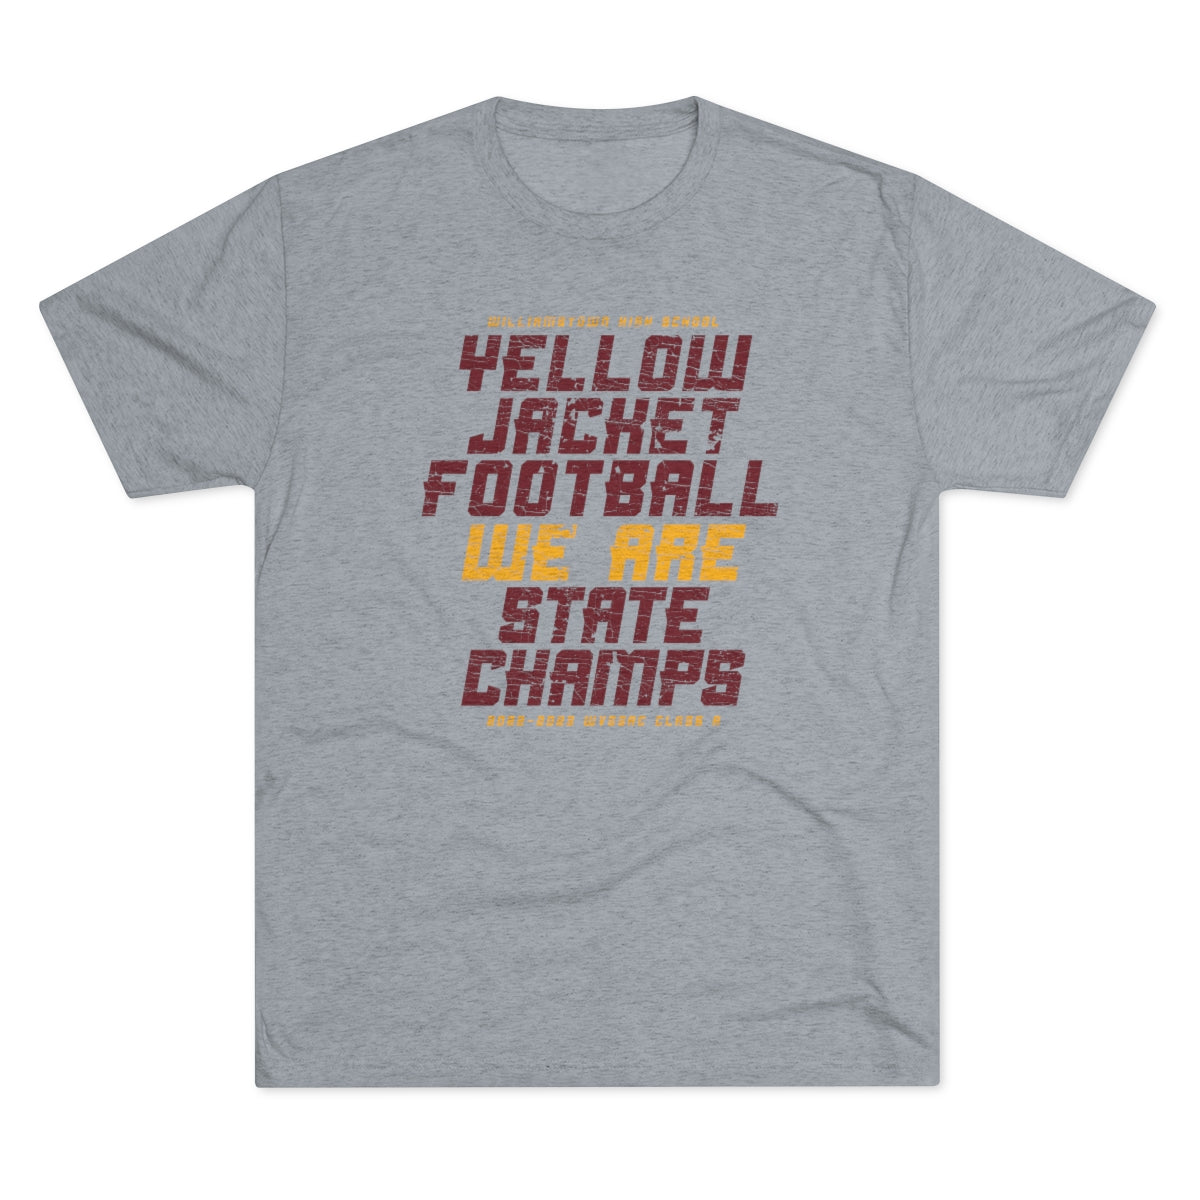 YELLOW JACKET FOOTBALL WE ARE STATE CHAMPS-Unisex Tri-Blend Crew Tee